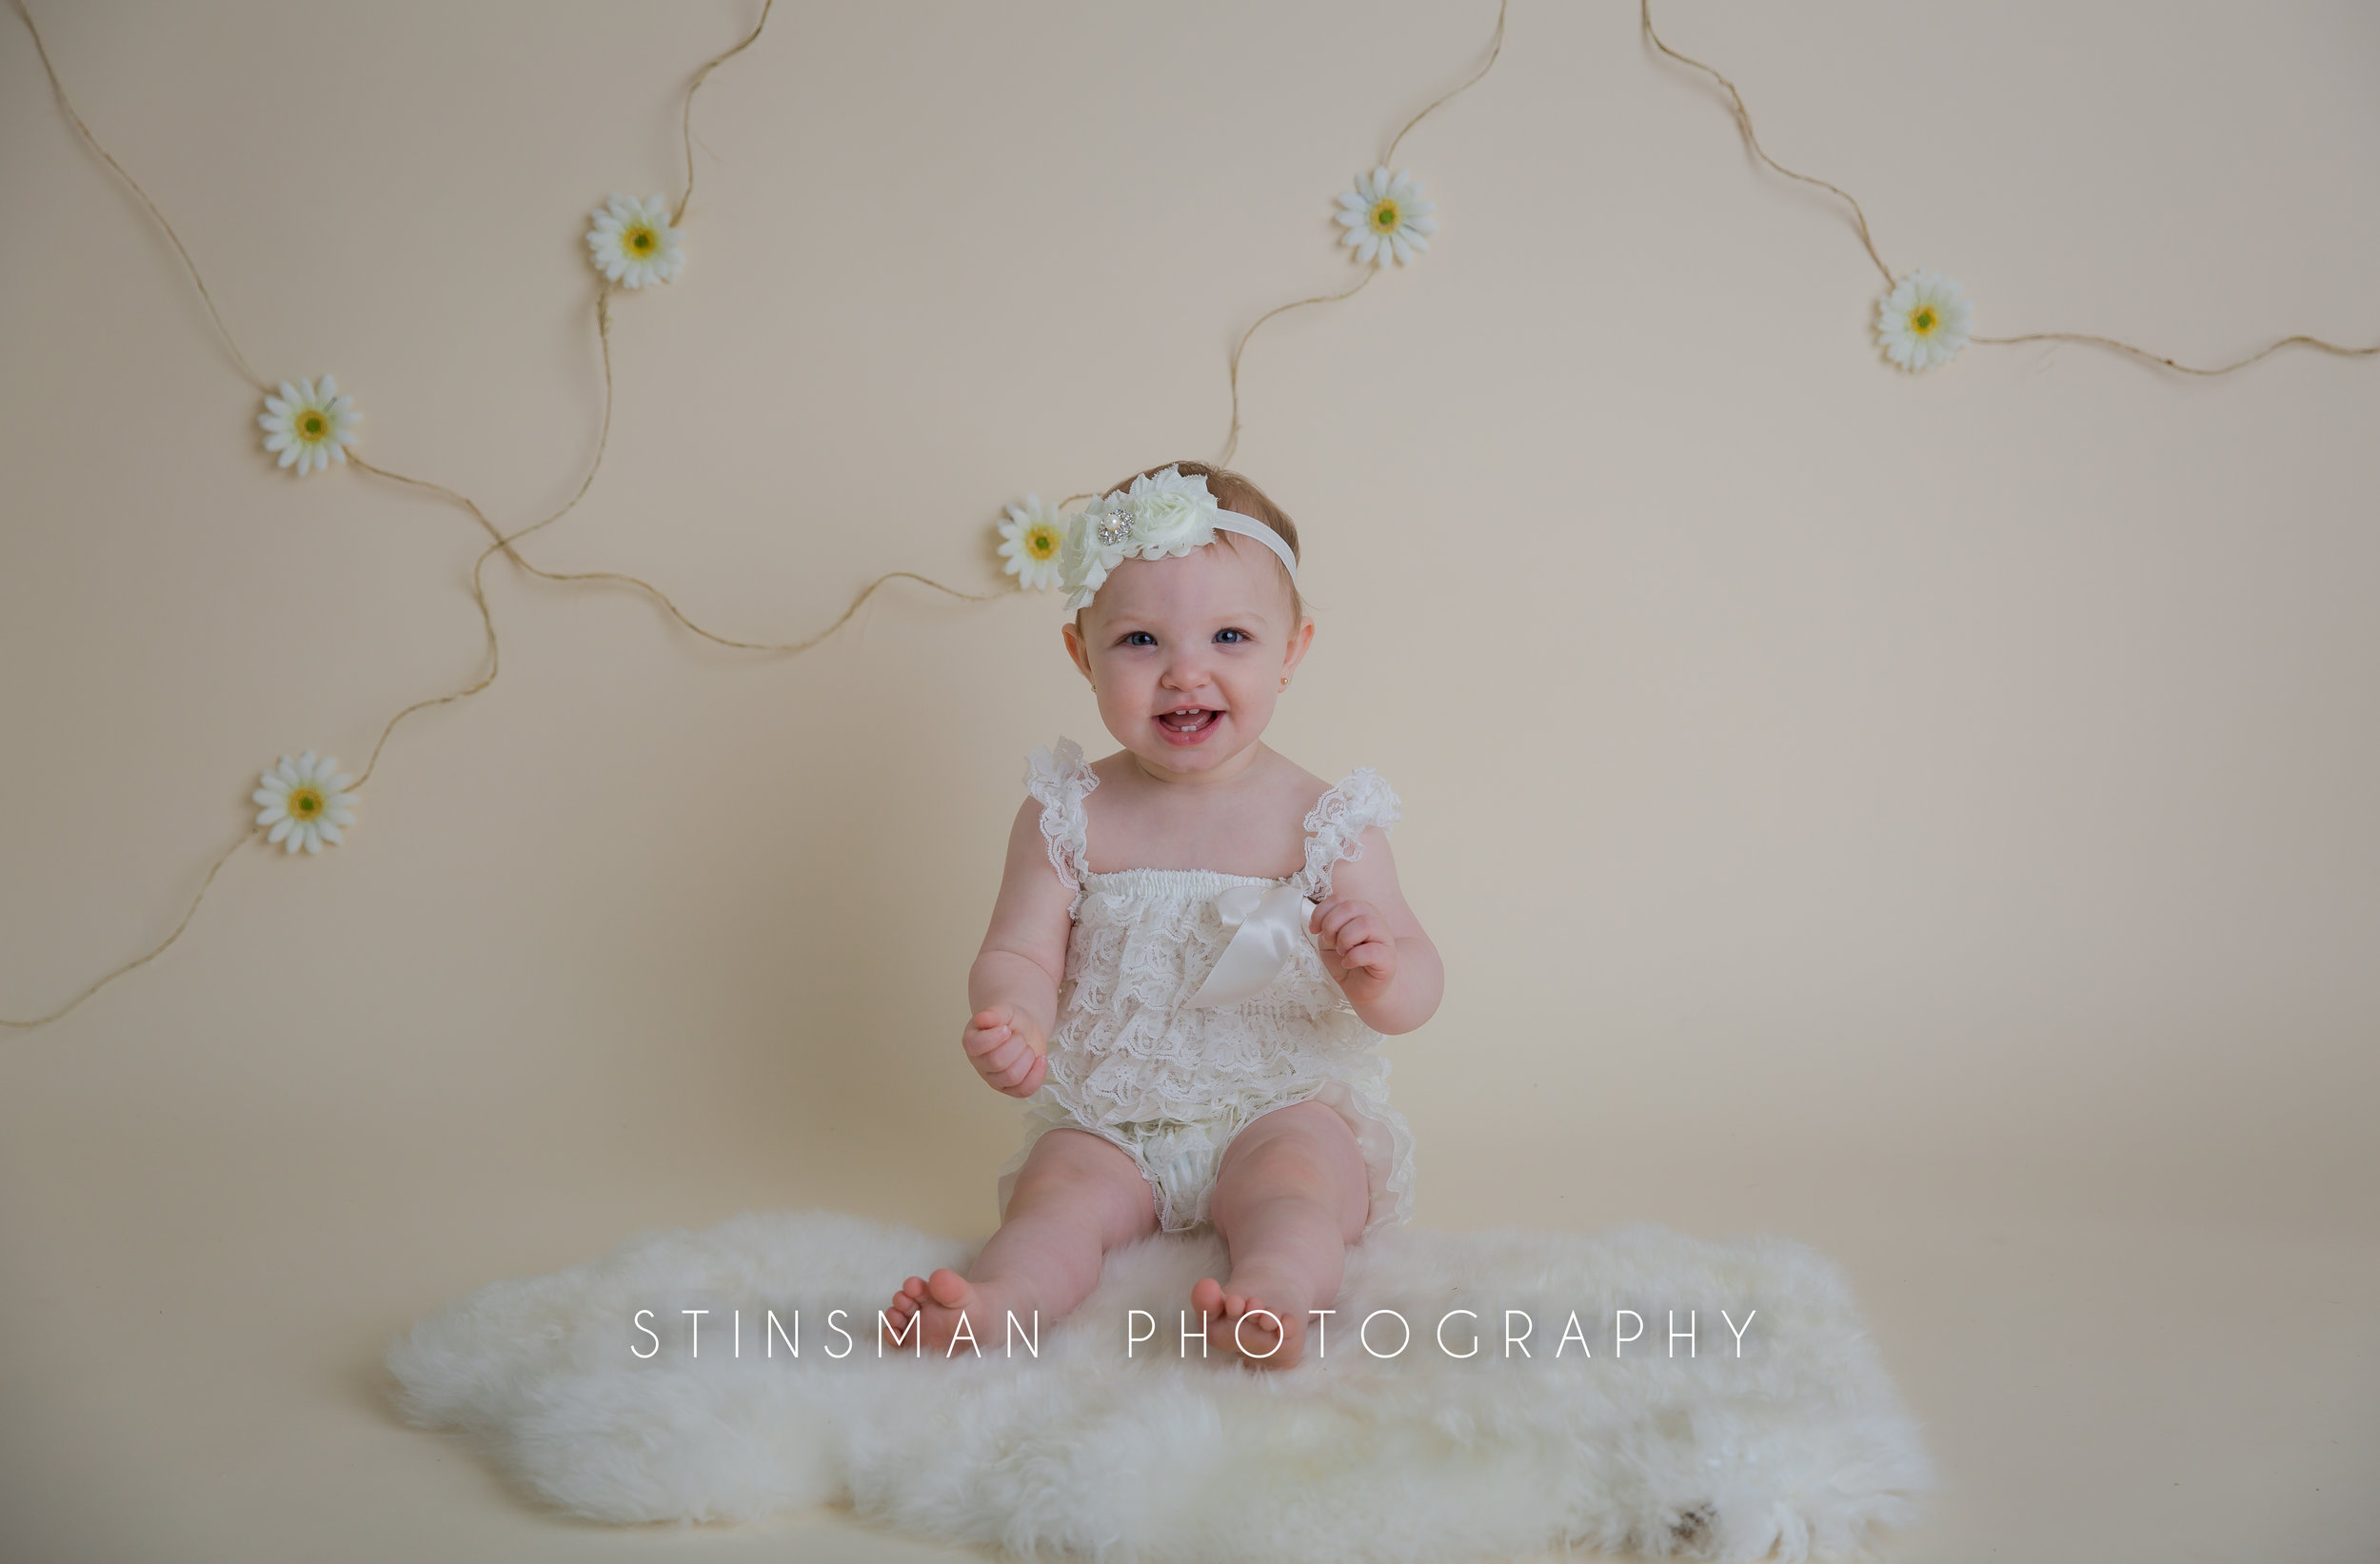 little girl photos for her first birthday wearing a white outfit and smiling